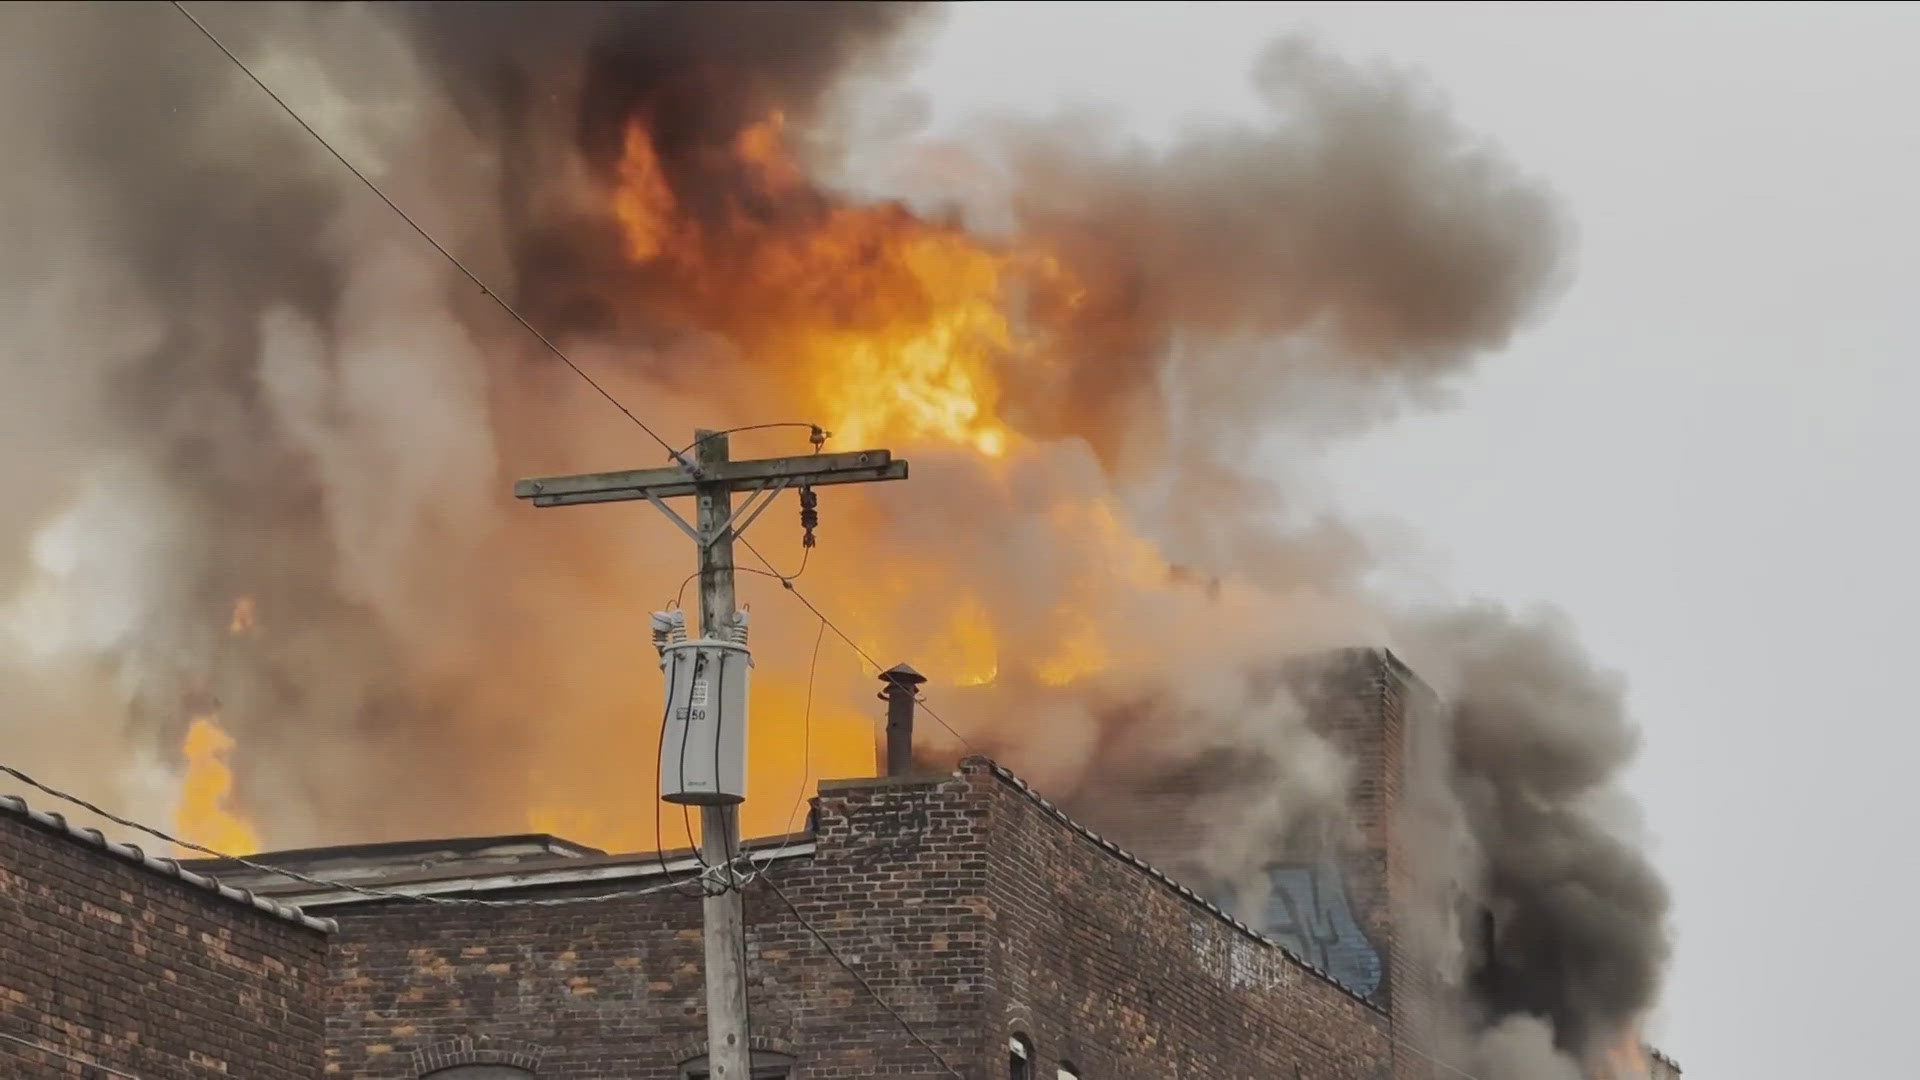 A judge made a critical ruling just hours before the Cobblestone fire